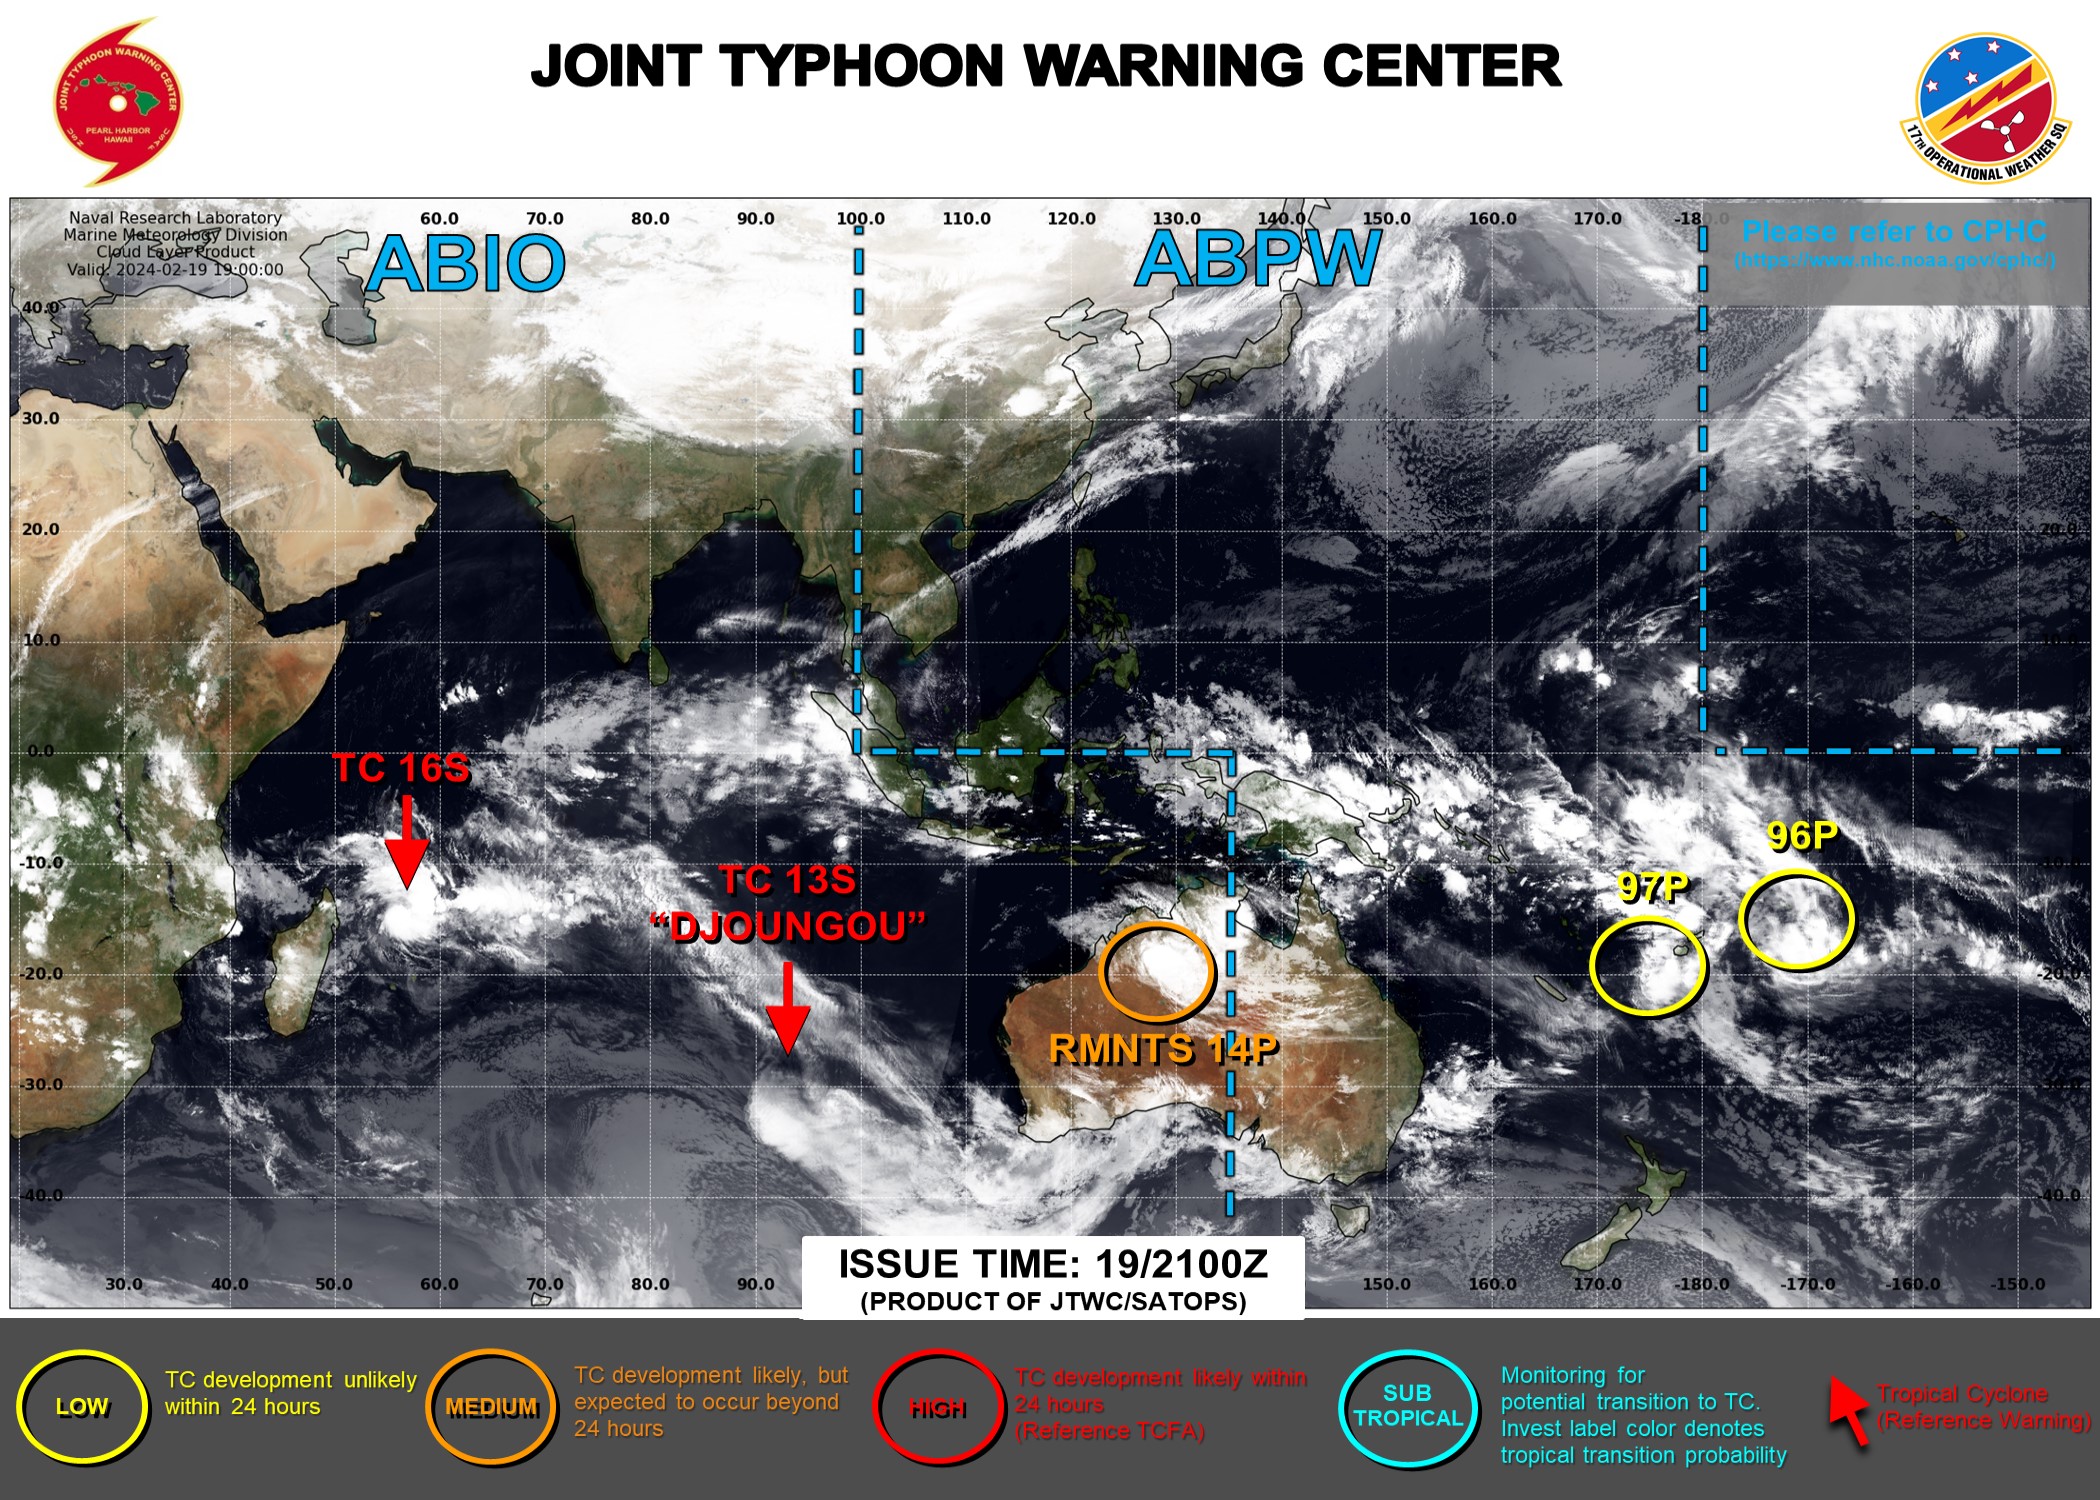 JTWC IS ISSUING 12HOURLY WARNINGS AND 3HOURLY SATELLITE BULLETINS ON TC 13S AND ON TC 16S. 3HOURLY SATELLITE BULLETINS ARE ISSUED ON THE OVERLAND REMNANTS OF TC 14P.